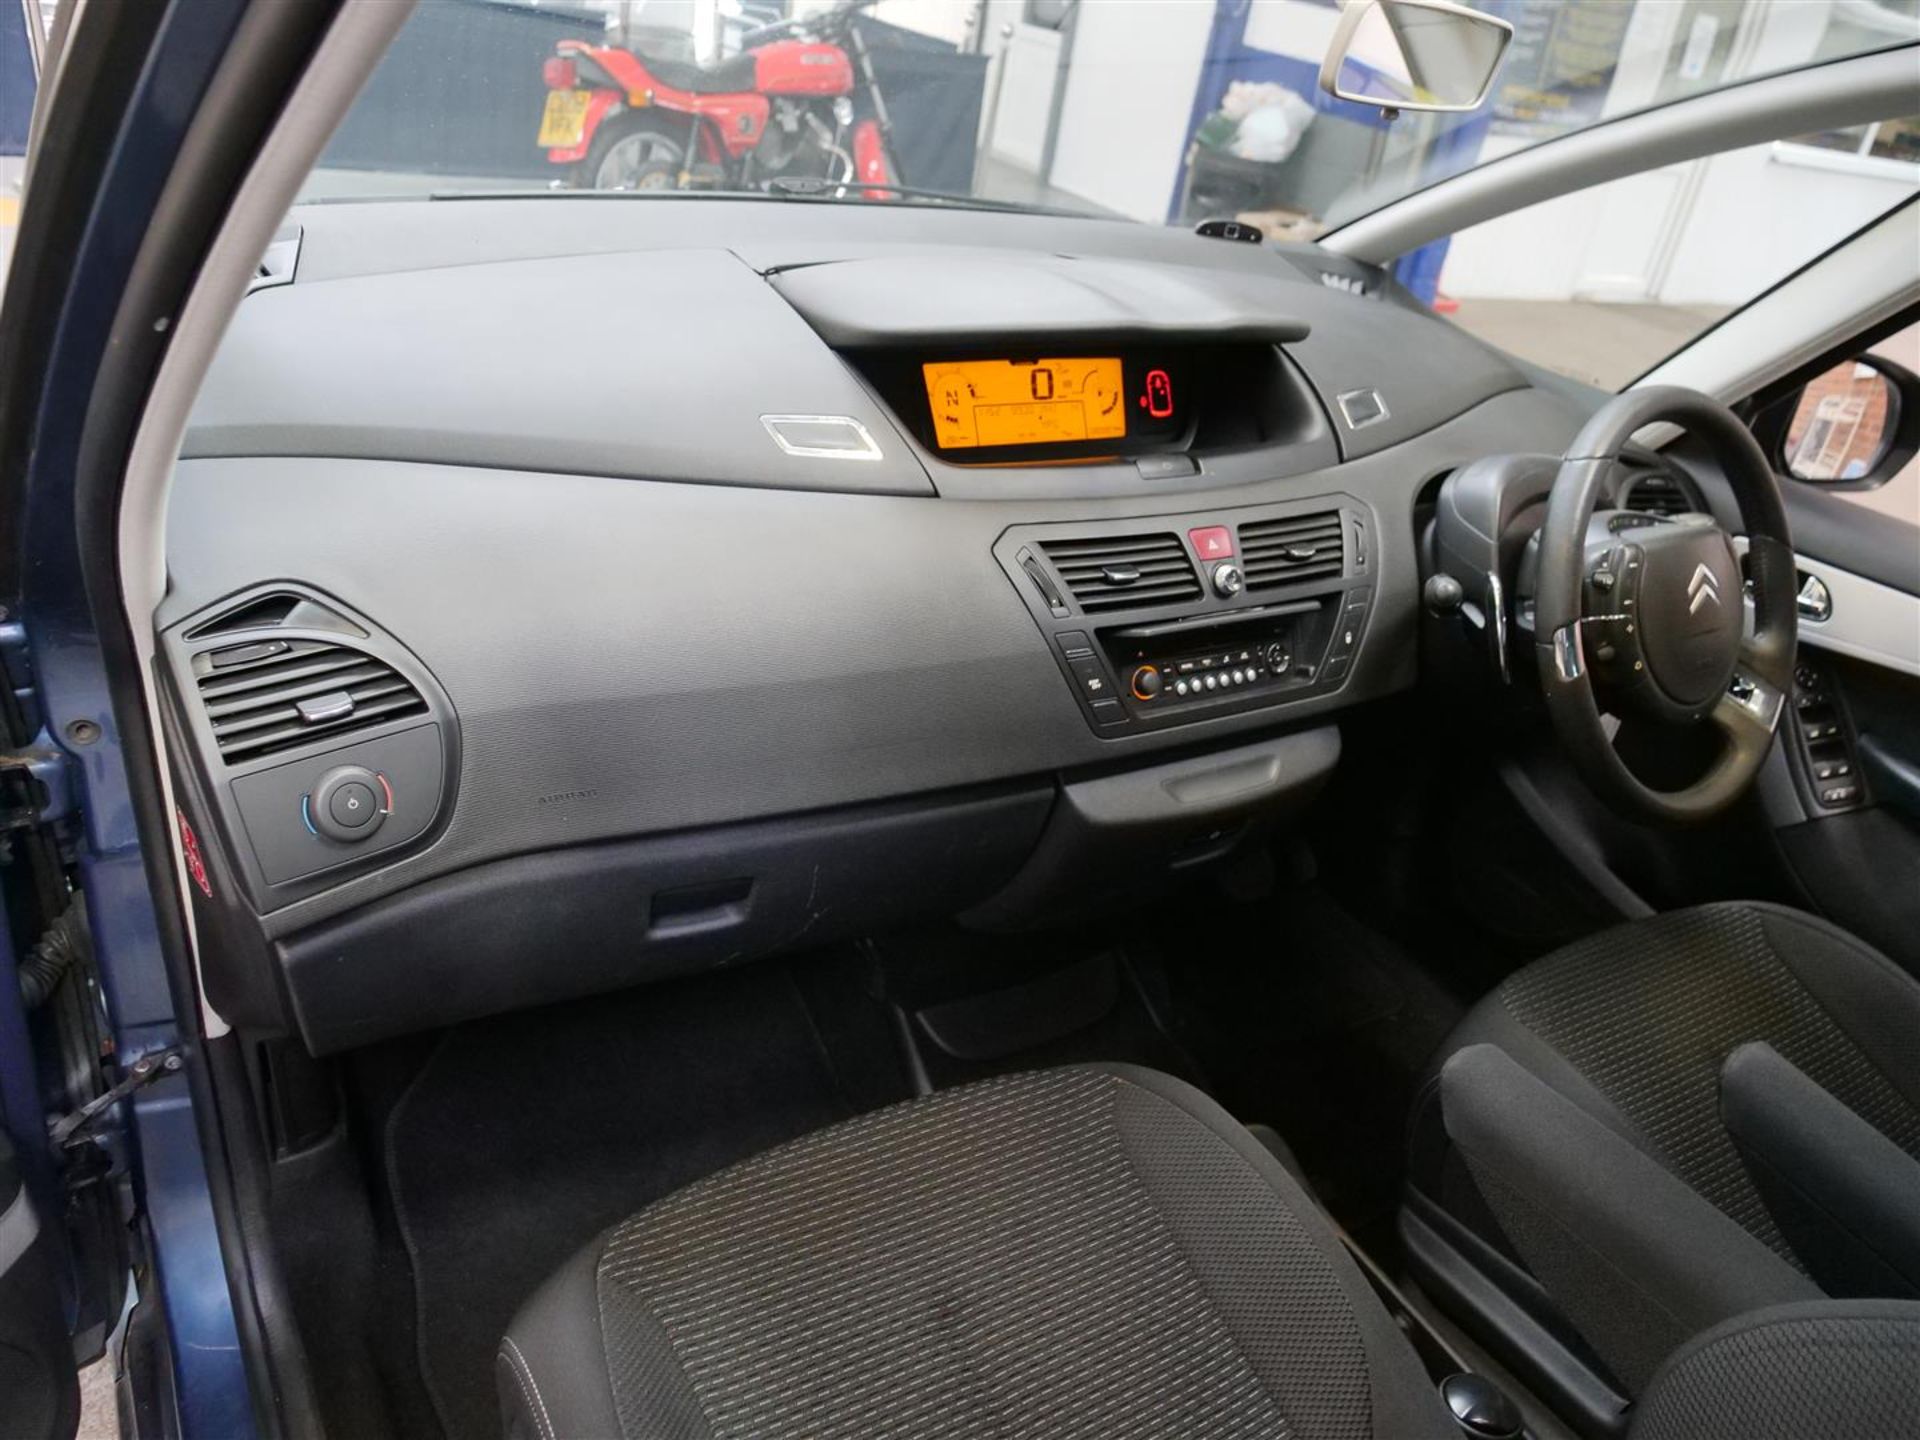 10 10 Citroen C4 Picasso VTR+ HDI - Image 11 of 41